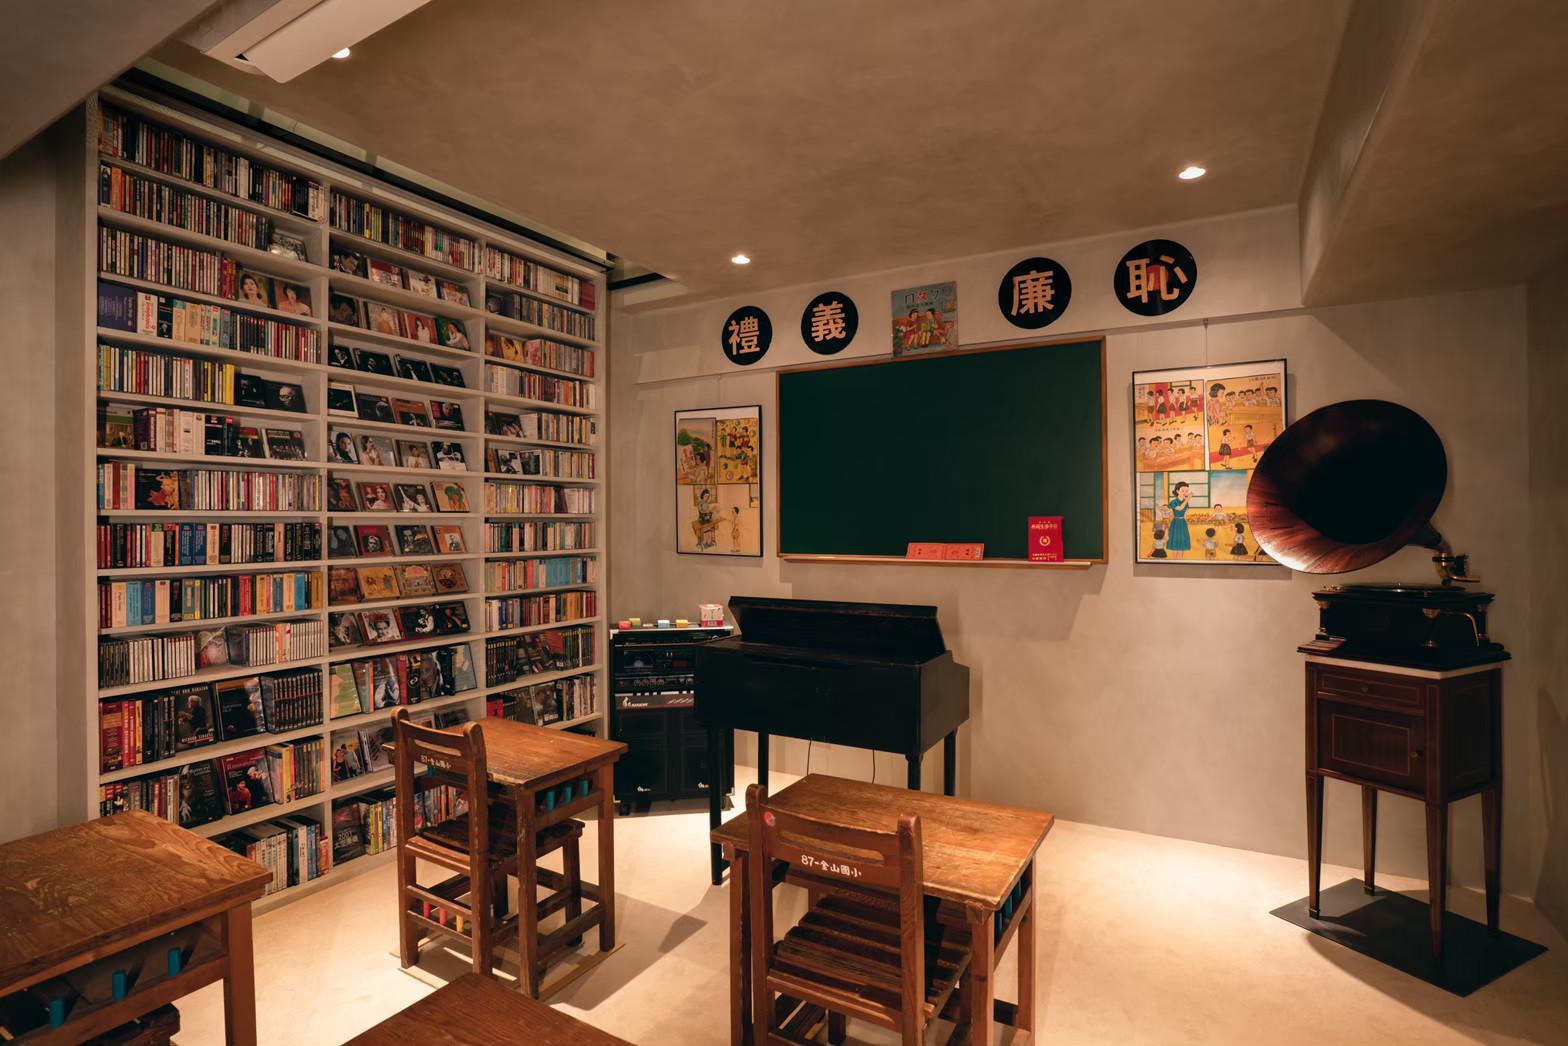 This Tapei coffee shop has the story of music woven into its interiors